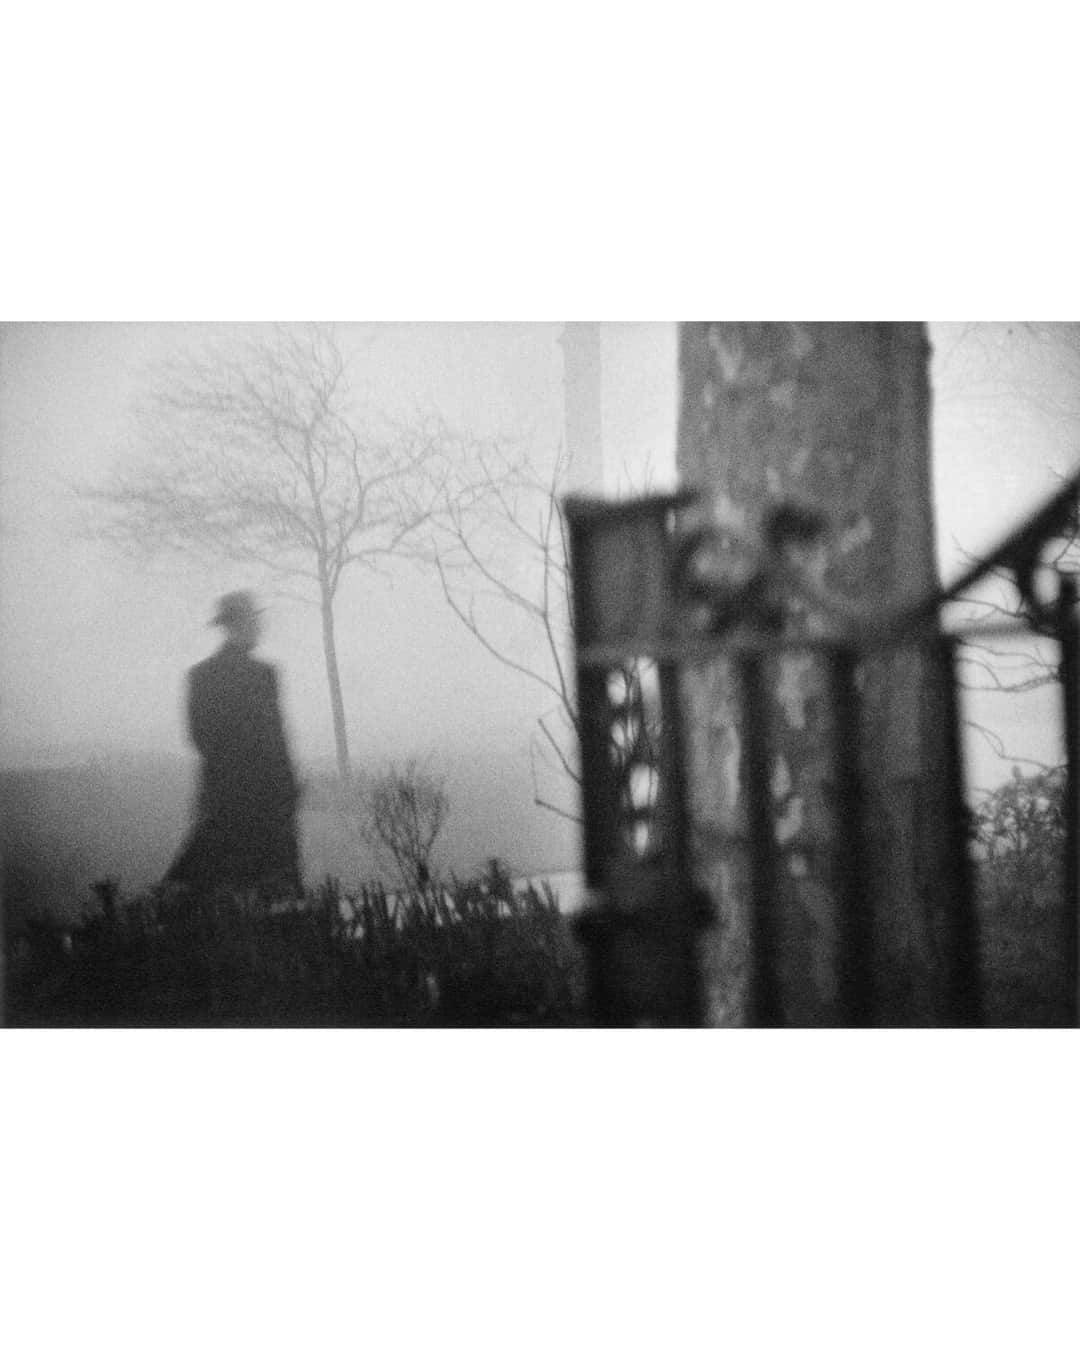 Magnum Photosさんのインスタグラム写真 - (Magnum PhotosInstagram)「Trick or Treat 🎃⁠ ⁠ In celebration of Halloween festivities, we search the Magnum archive for the mysterious and macabre as cultures around the world prepare to observe their own traditions.⁠ ⁠ A supernatural self-portrait sees @susanmeiselas gazing through her own lens, as if occupying the liminal space between the living and the beyond.⁠ ⁠ @herbert_list’s surreal image depicting a skull operation forms part of his 1944 series on Präuschers Panoptikum, a former waxworks museum in Vienna, Austria.⁠ ⁠ In a photograph from @abbas.photos, a spectral glow follows a woman celebrating Día de los Muertos (Day of the Dead).⁠ ⁠ Comment your favorite 💀⁠ ⁠ PHOTOS (left to right):⁠ ⁠ (1) Carnival. Basel, Switzerland. 1975. © Martine Franck / Magnum Photos⁠ ⁠ (2) London, England. 1958-1959. © @sergiolarrain / Magnum Photos⁠ ⁠ (3) Père Lachaise Cemetery. Paris, France. © Martine Franck / Magnum Photos⁠ ⁠ (4) French painter Kiki Picasso at his home during the shooting of Une minute pour Canal Plus, a short film about him directed by French filmmaker Franck Moisnard. Paris, France. © Guy Le Querrec / Magnum Photos⁠ ⁠ (5) 44 Irving St. Cambridge, MA. USA. 1971. © @susanmeiselas / Magnum Photos⁠ ⁠ (6) Trepanation (skull operation). From the photo-essay on Praüschers Panoptikum at the Prater. A grotesque chamber of horrors dating from 1870, it contained wax figures of historical personages, inventions, events, crimes, illnesses and anatomical depictions. Vienna, Austria. © @herbert_list / Magnum Photos⁠ ⁠ (7) Chicago, USA. 1969. @ Hiroji Kubota / Magnum Photos⁠ ⁠ (8) Mataranka. Northern Territory. Australia. 2003. © @chillioctopus / Magnum Photos⁠ ⁠ (9) A woman celebrates the Day of the Dead at the village cemetery. Village of Maxuxtepectla, Hidalgo. 1984. © @abbas.photos / Magnum Photos⁠ ⁠ (10) Boy holding a plaster skeleton for the day of the dead. Metepec, Mexico. 1969. © @fondationreneburri / Magnum Photos」10月28日 0時01分 - magnumphotos